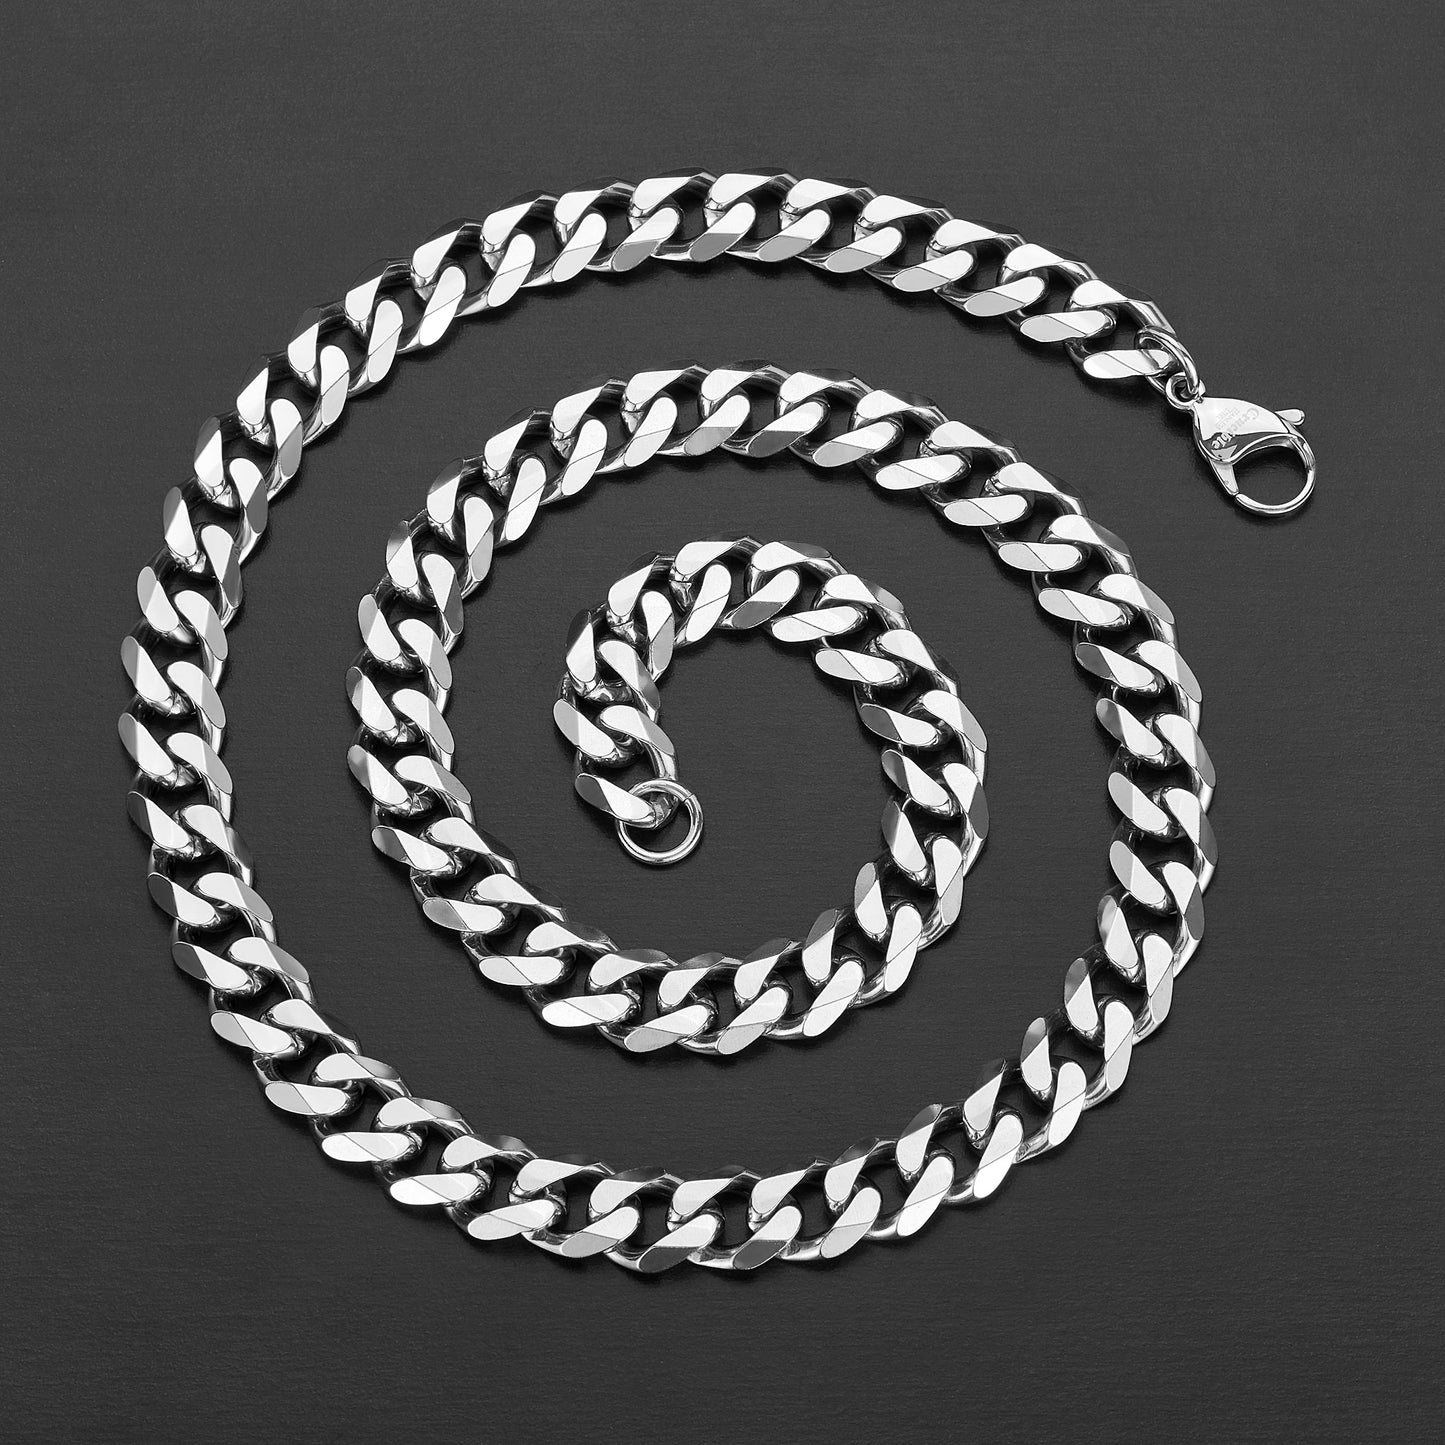 Men's Polished Beveled Curb Chain Stainless Steel Necklace (10mm) - 24"